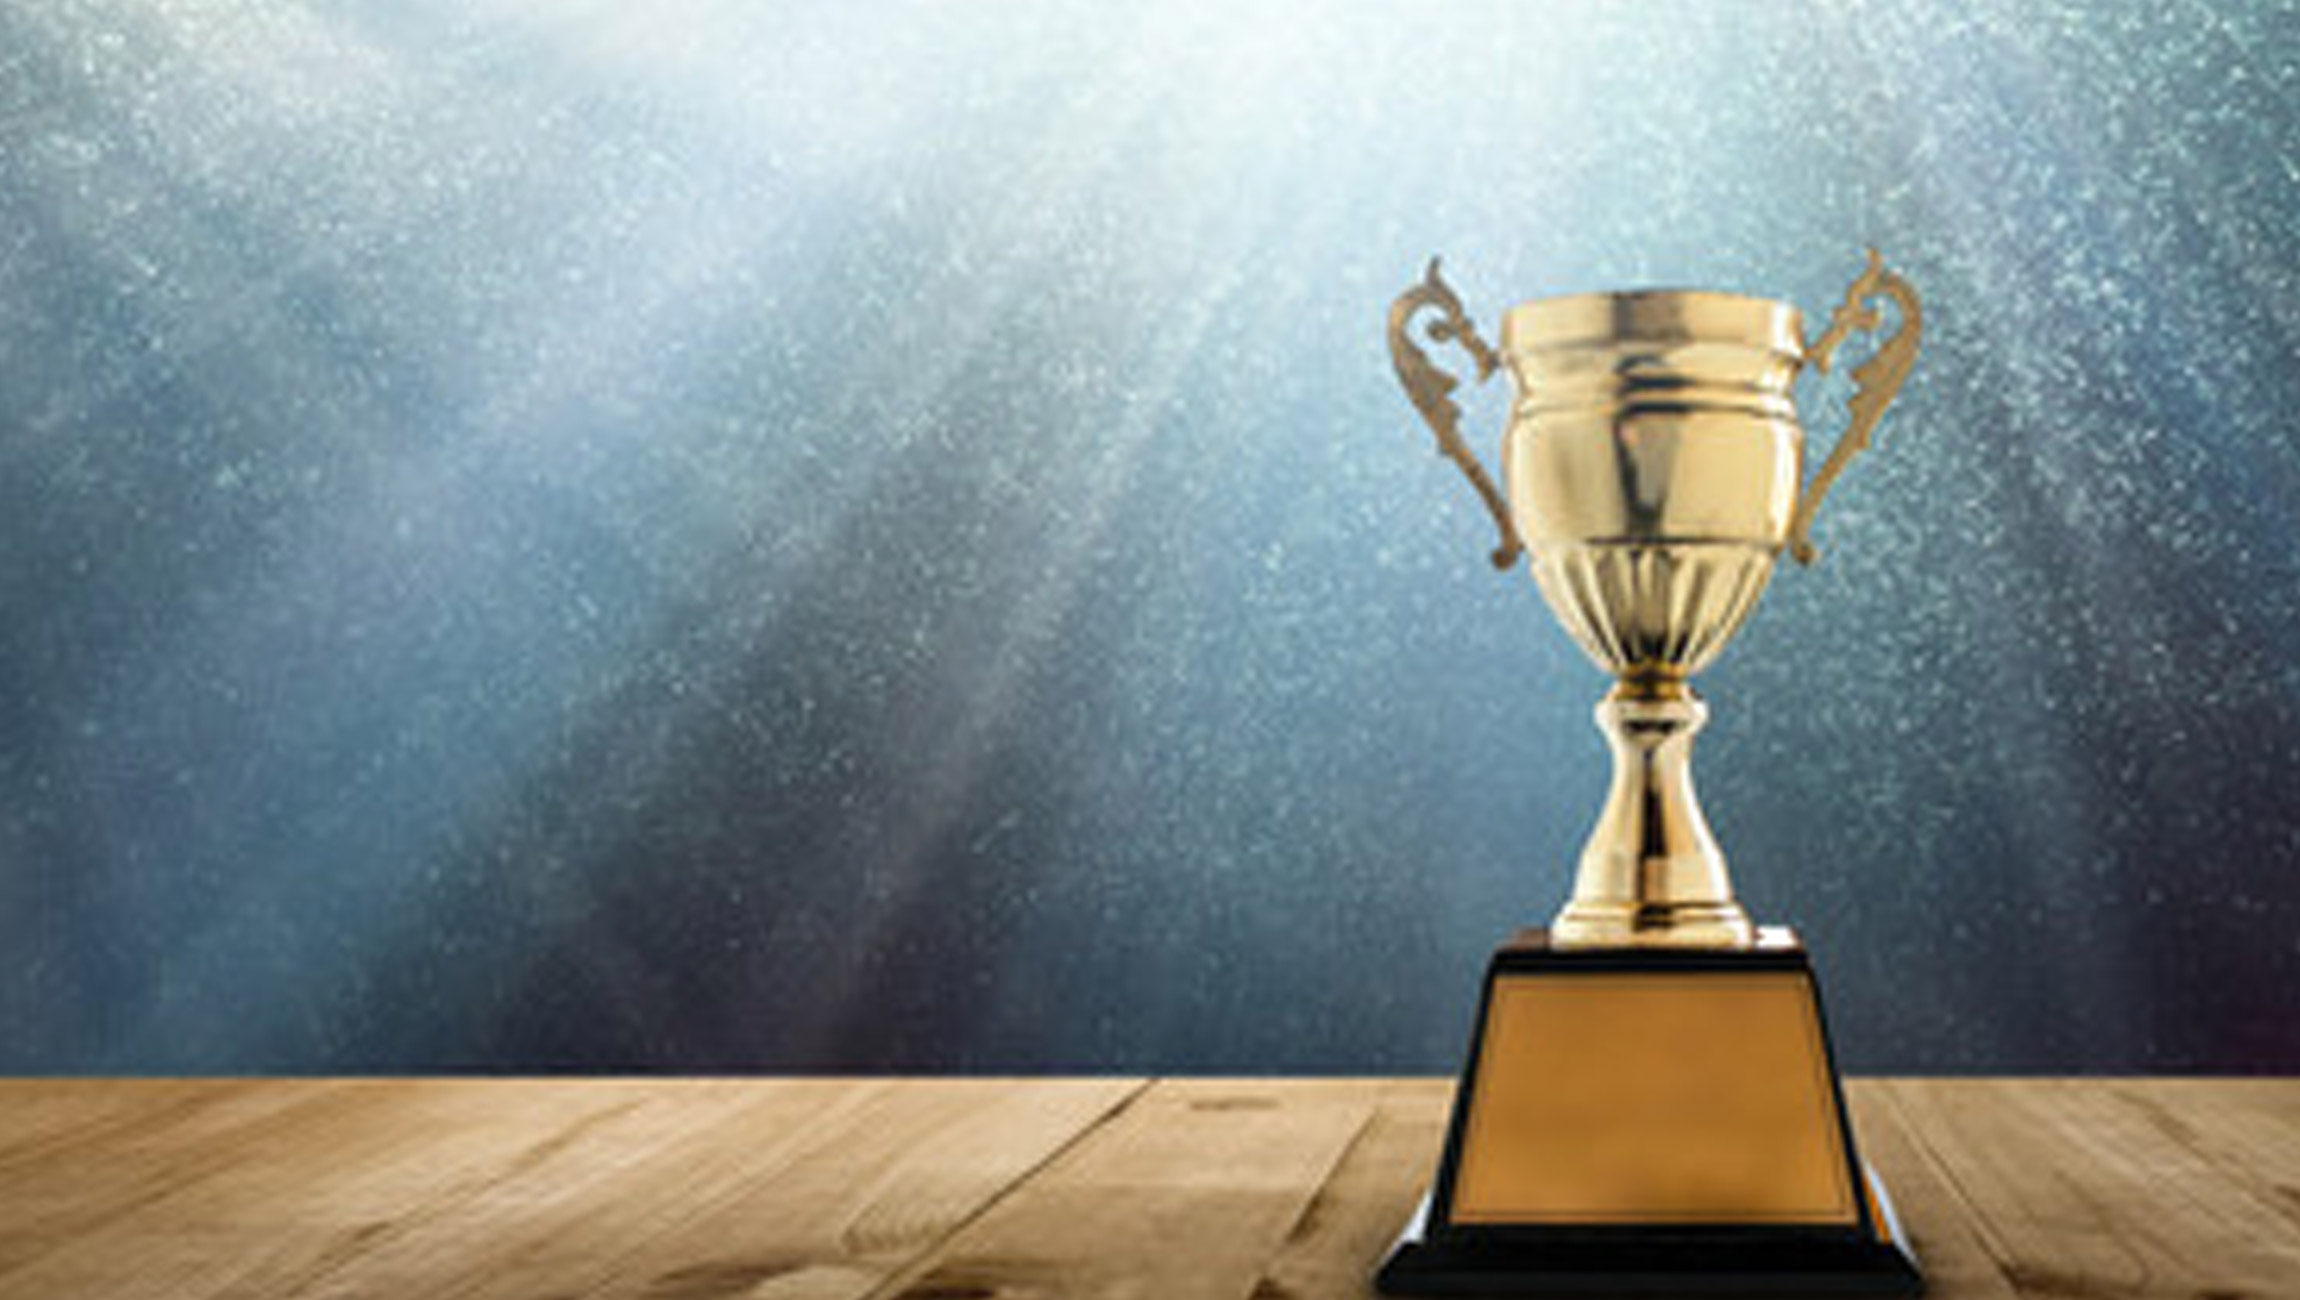 ShoppingGives Announces Winners of the 2022 Social Impact Awards